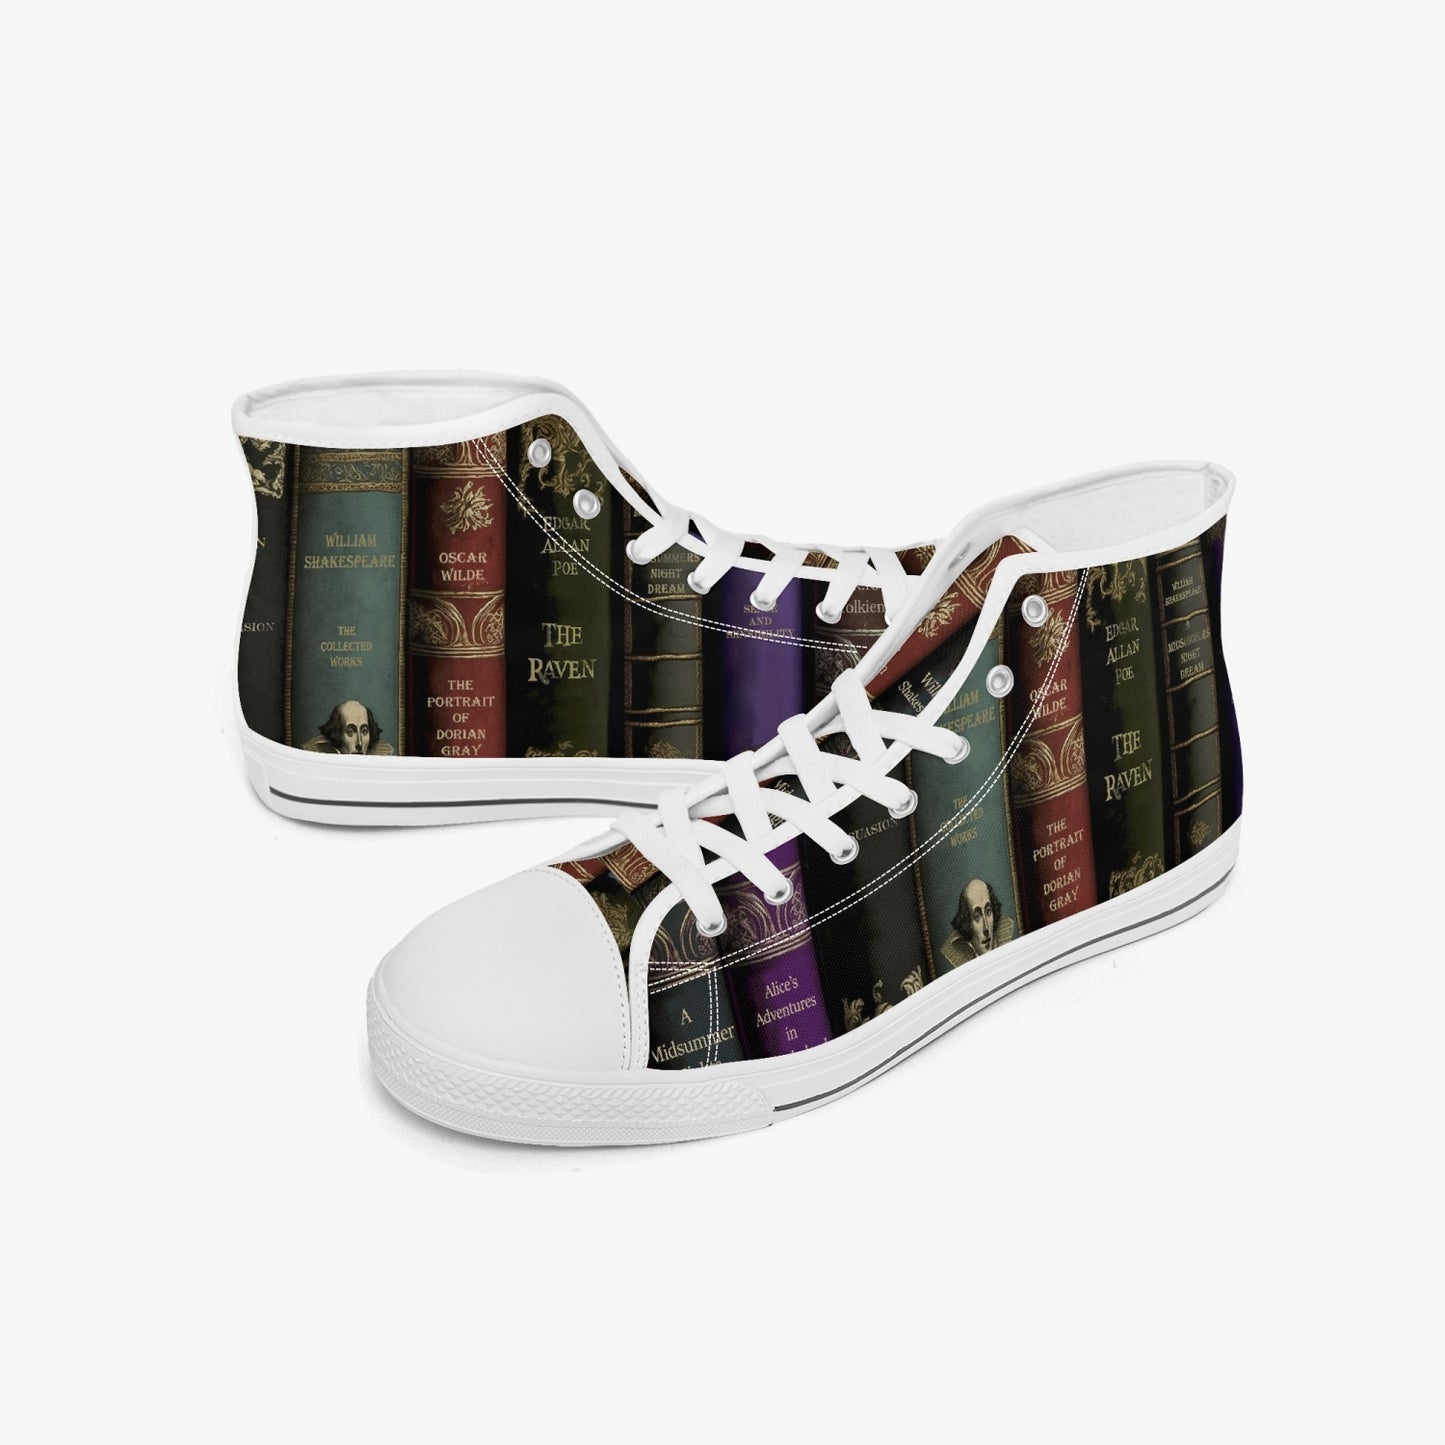 Vintage Library Books Hi Top Sneakers - Librarian Shoes - Dark Academia High Tops (JP4002)